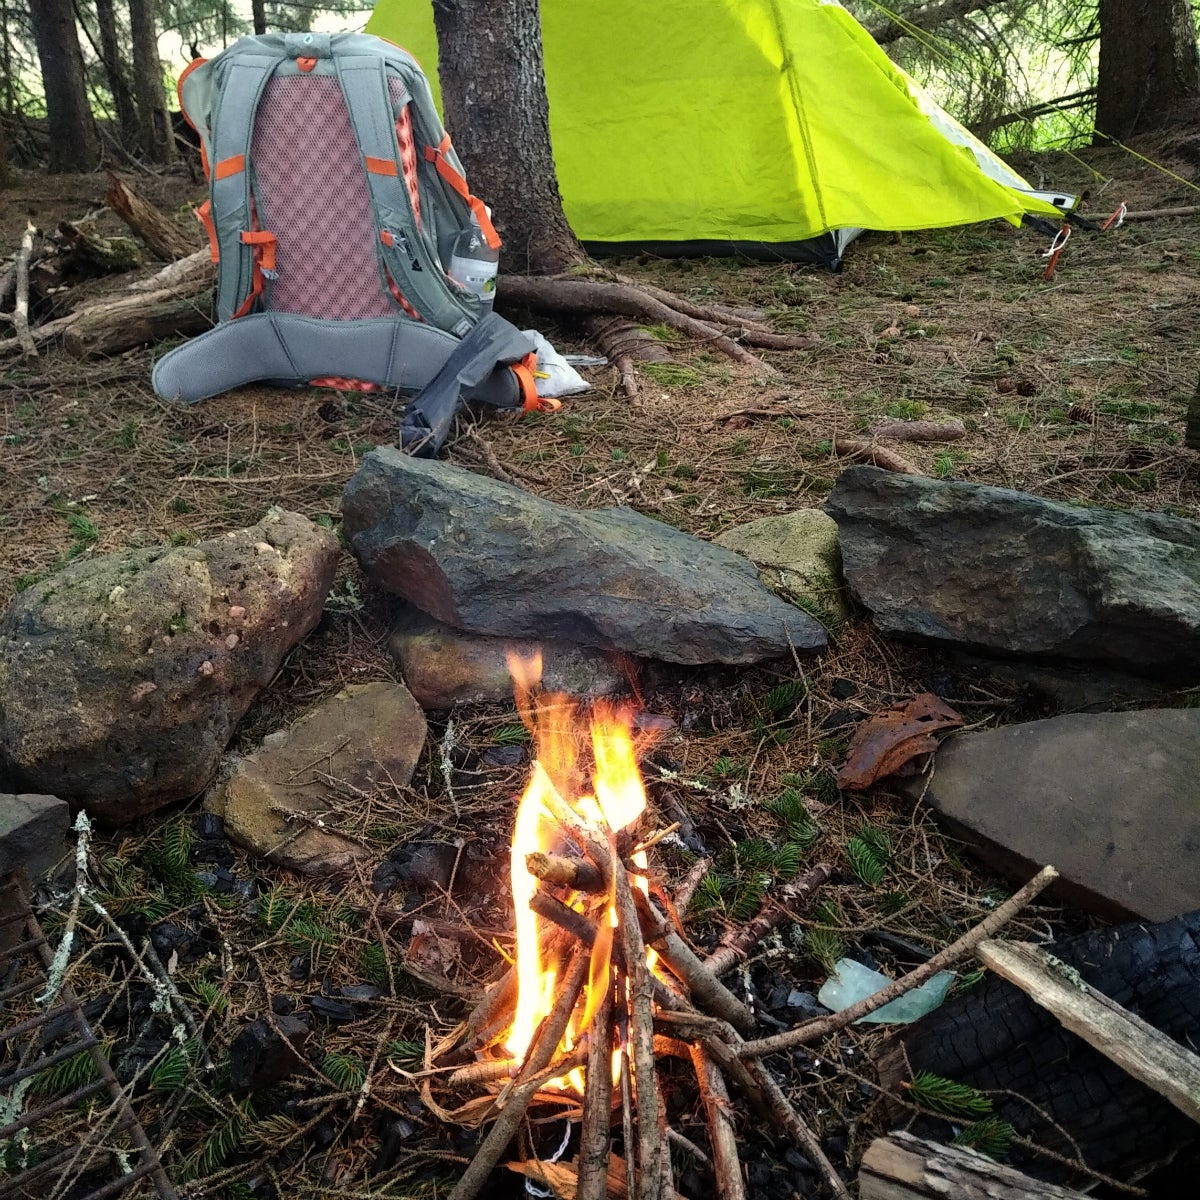 ADV Motorcycle Camping Snowshoe Spruce WV Pocahontas County Path Less Traveled Conflicts ADVenture Andrew Dasilva Honda CT125 Trail 125